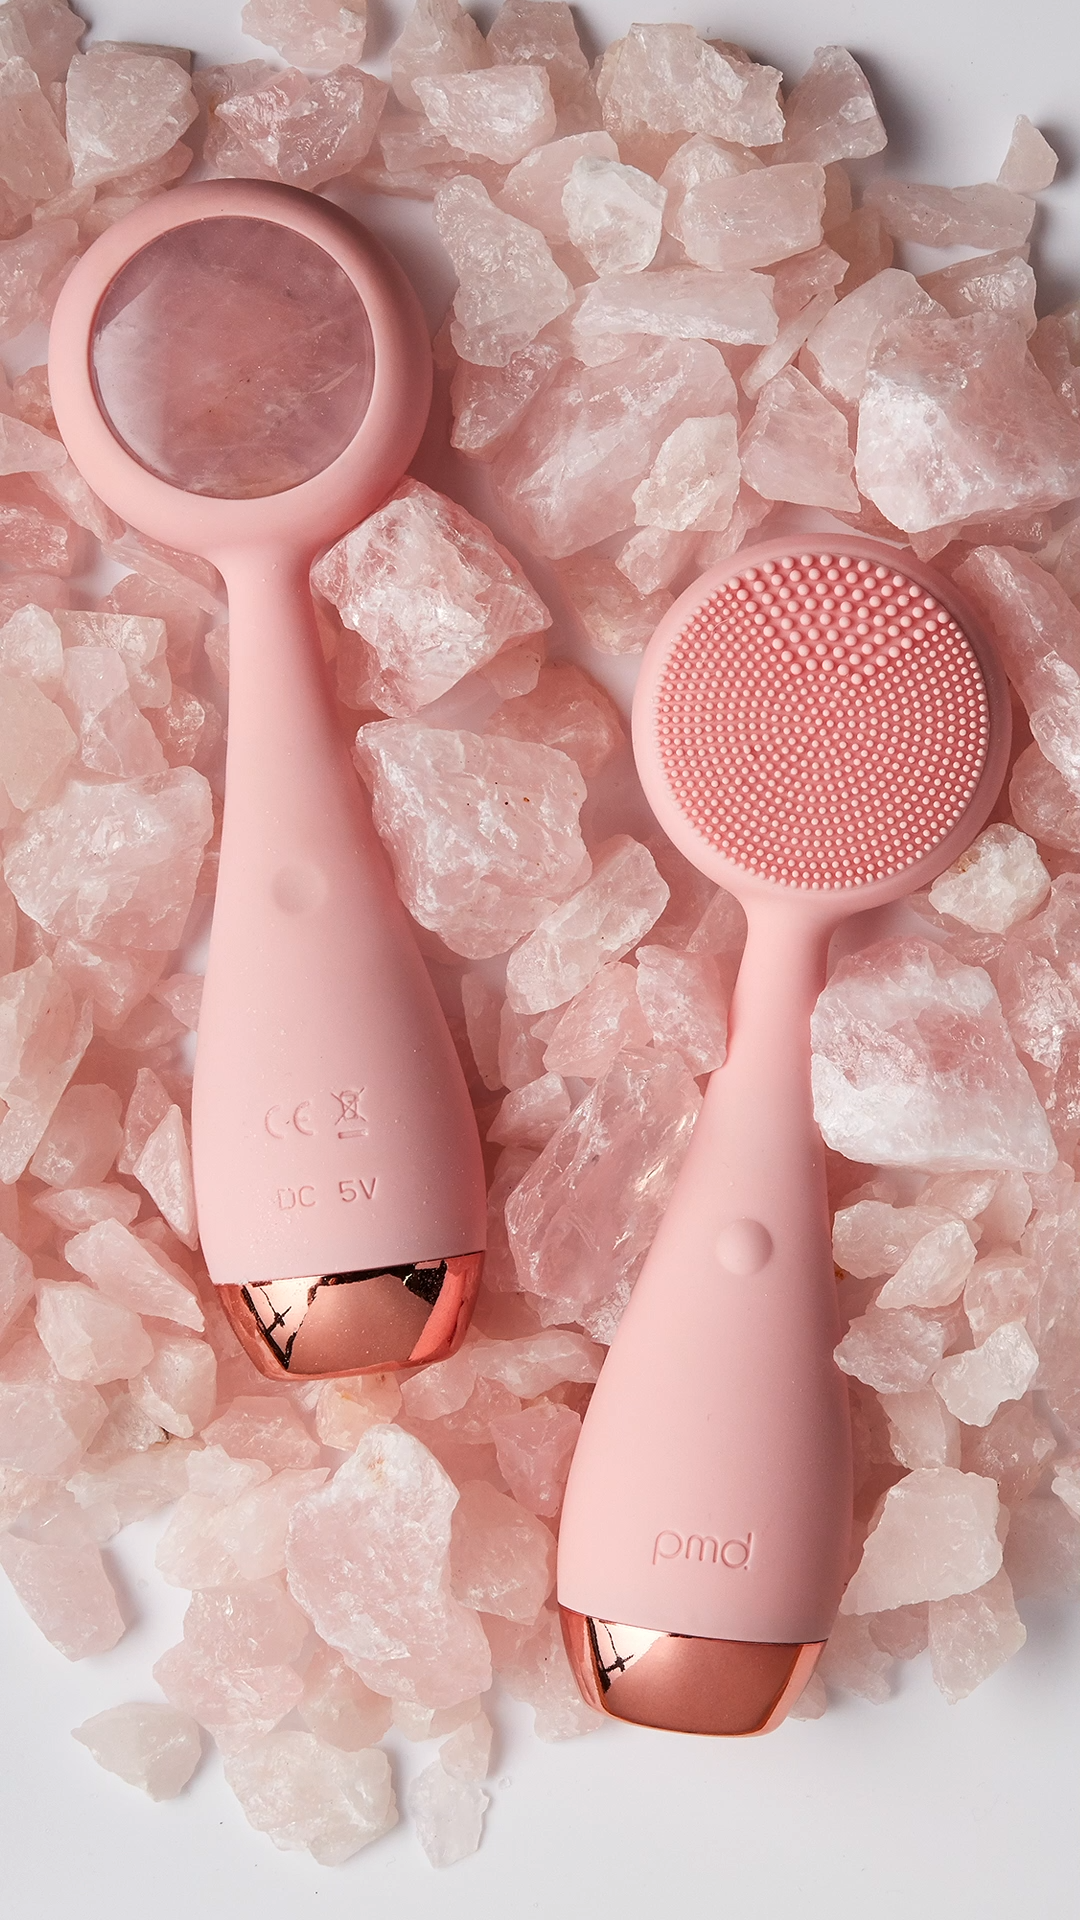 Rose Quartz Facial with the PMD Clean Pro RQ -   18 skin care Photography summer ideas